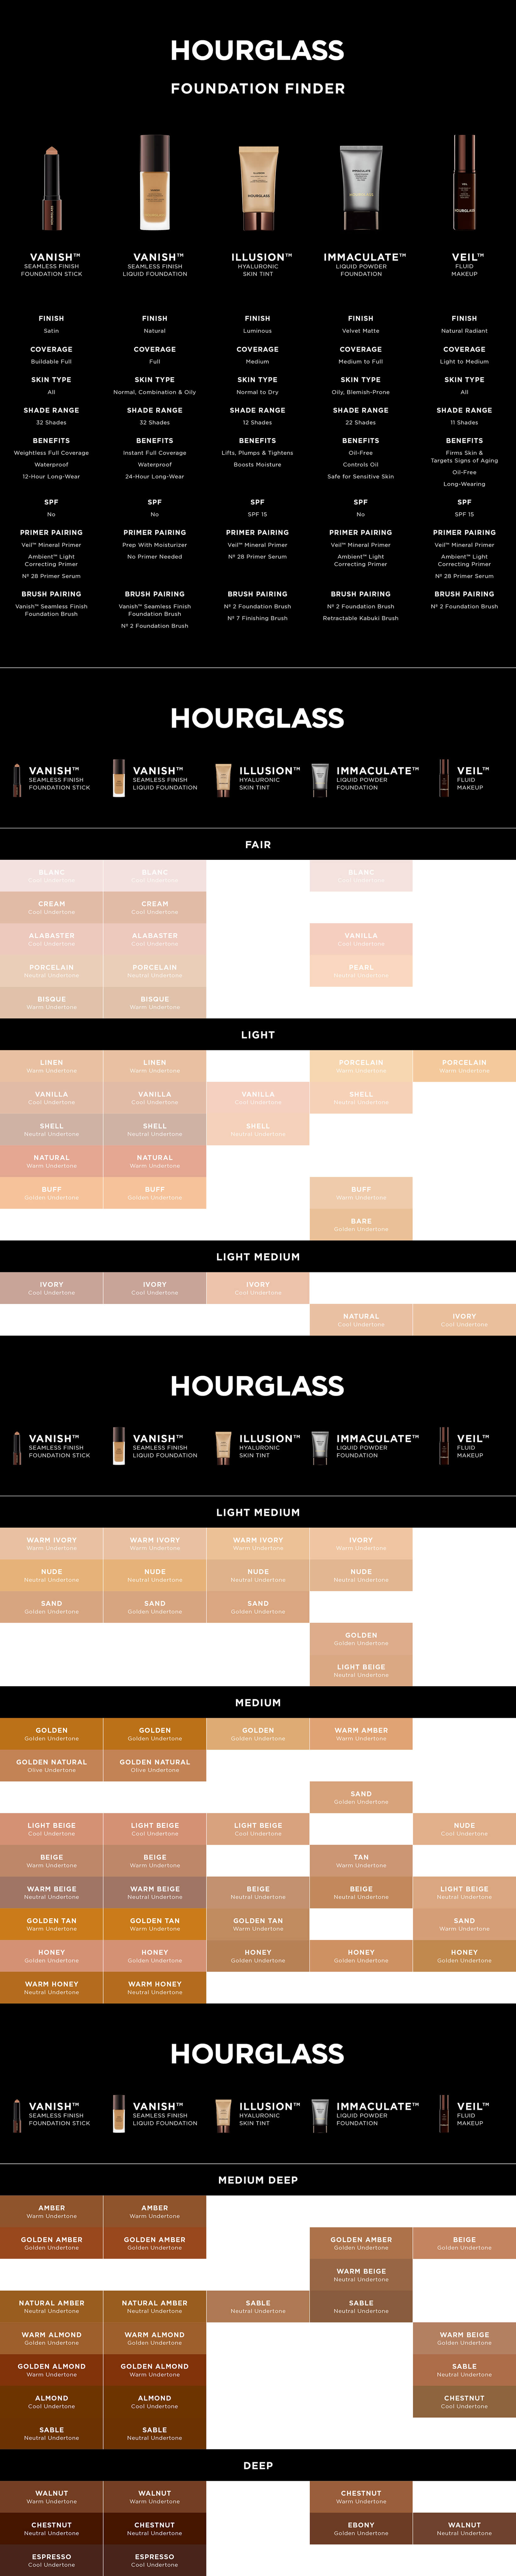 chef vitamin himmel Foundation Shade Finder | Hourglass Cosmetics